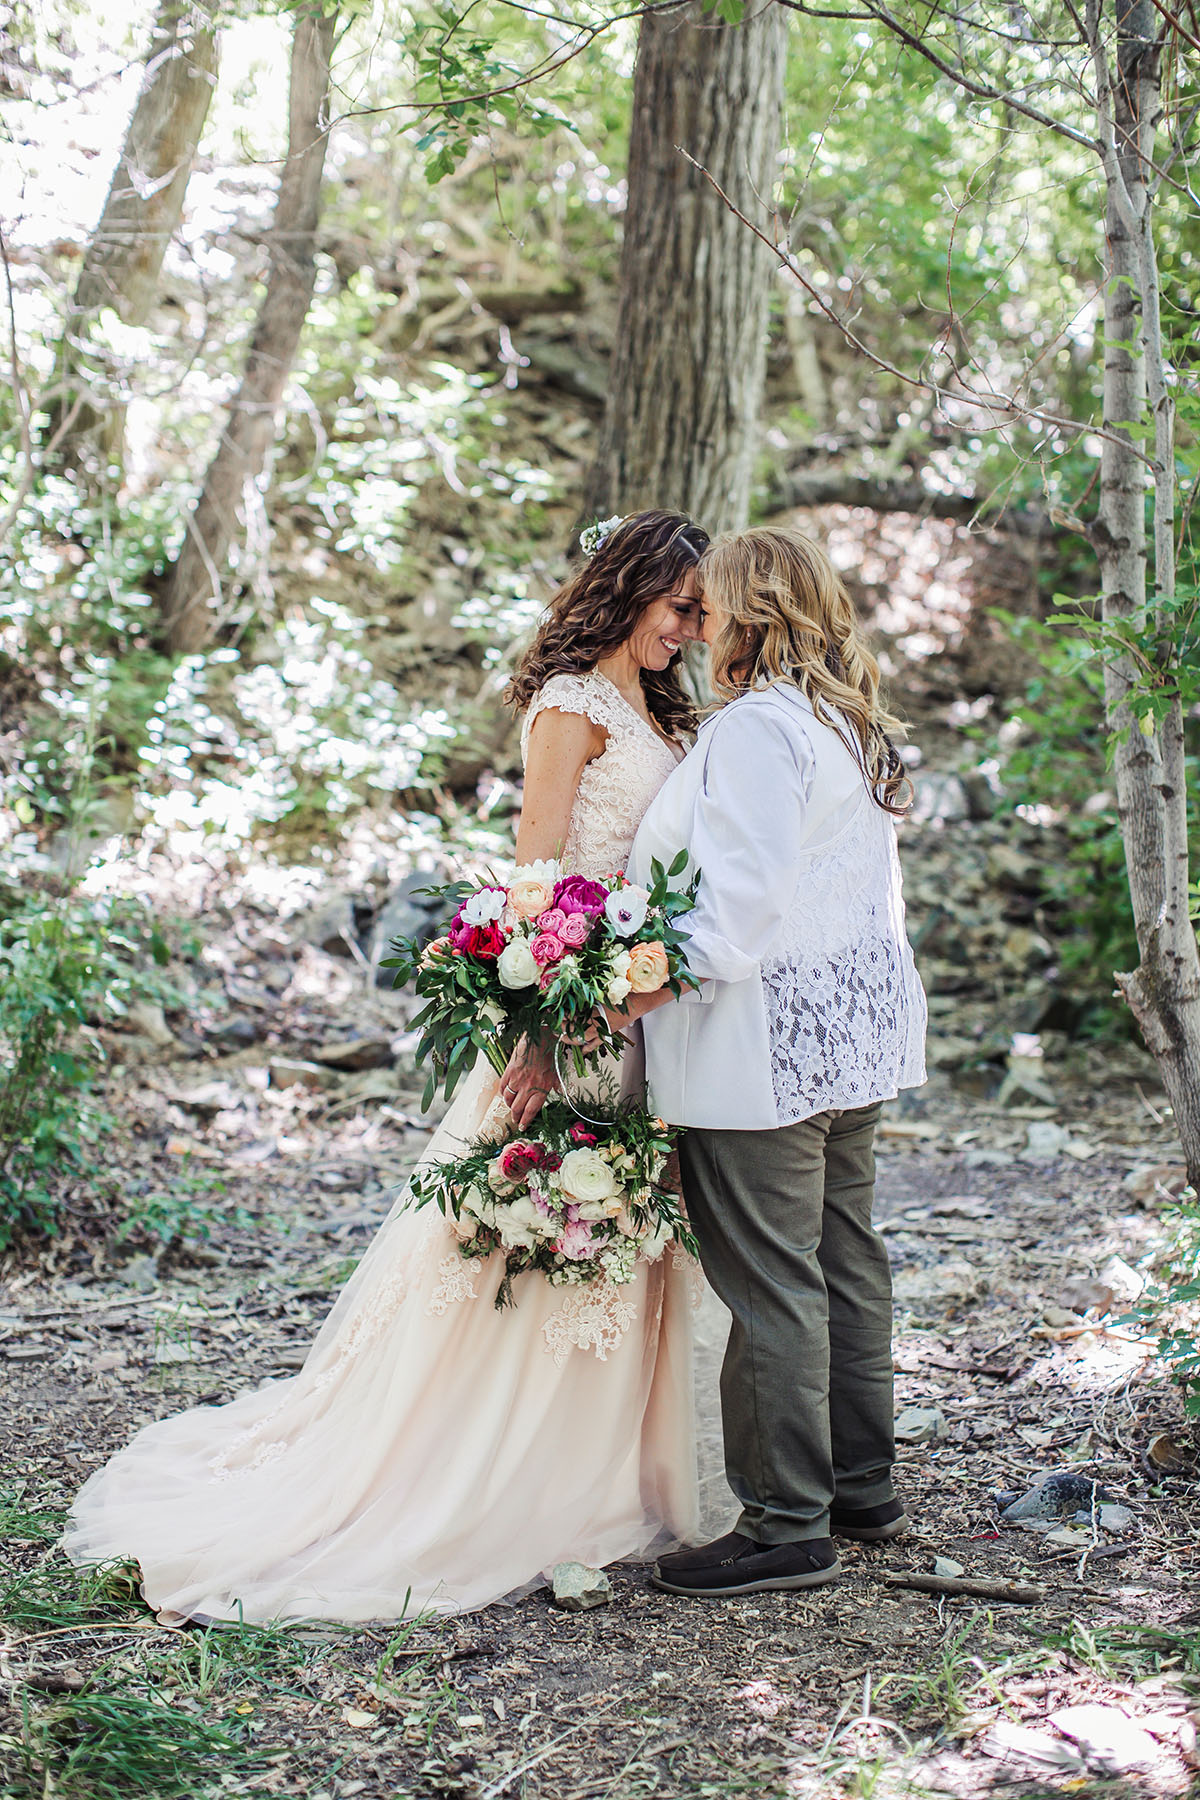 Eclectic bohemian mountain fairytale wedding two brides long tulle champagne dress Lane Bryant outfit flowers nature